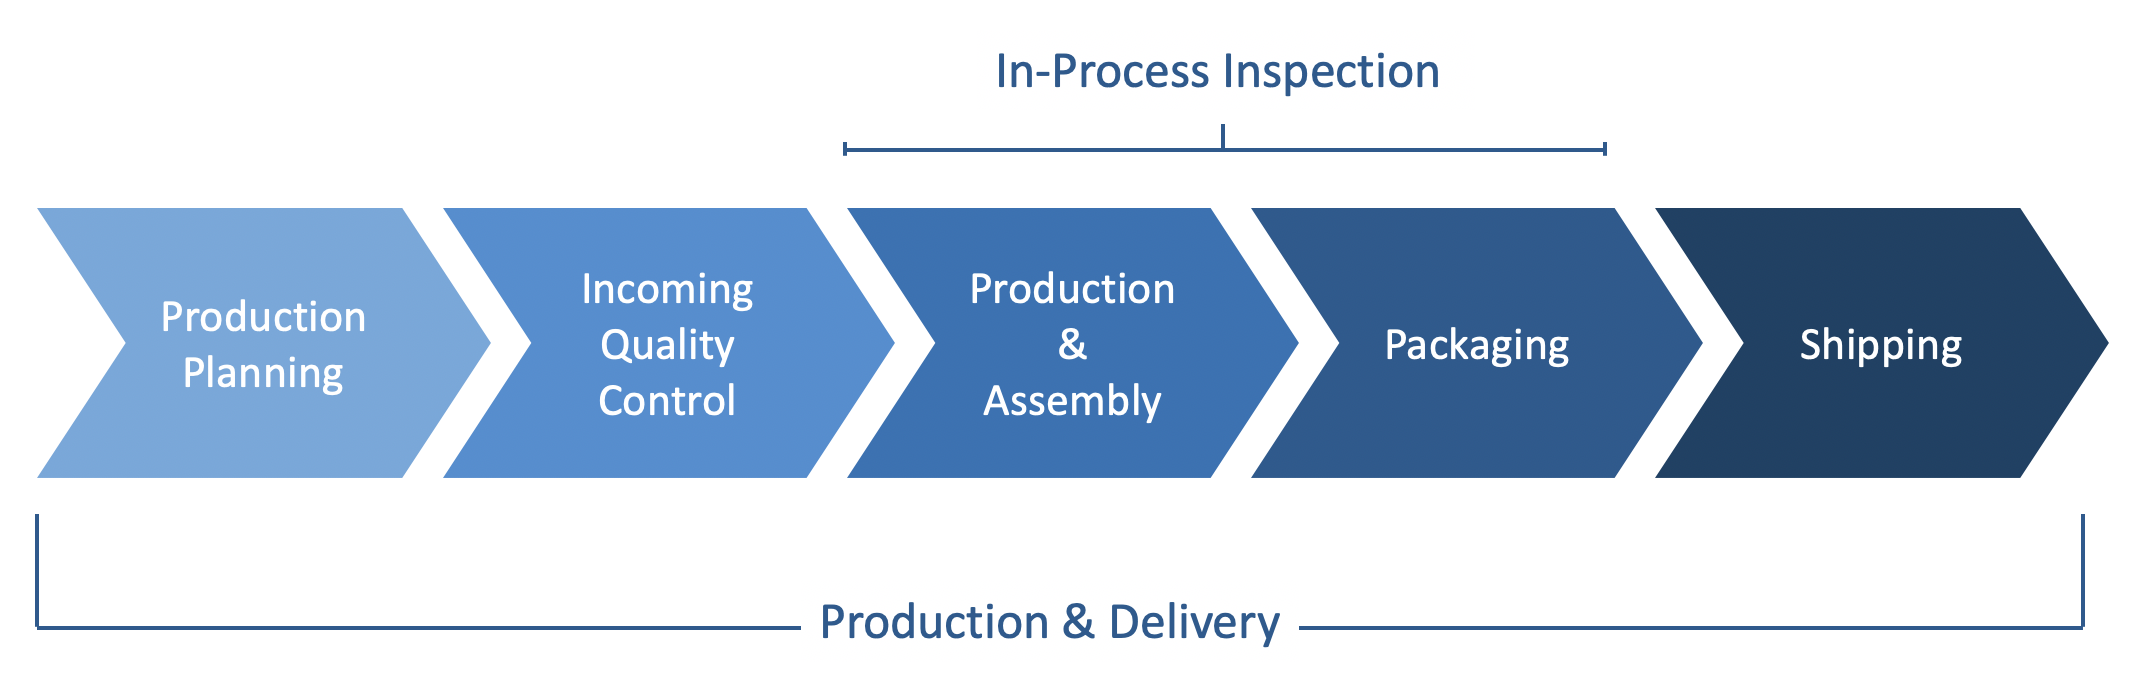 What is an In-Process Inspection